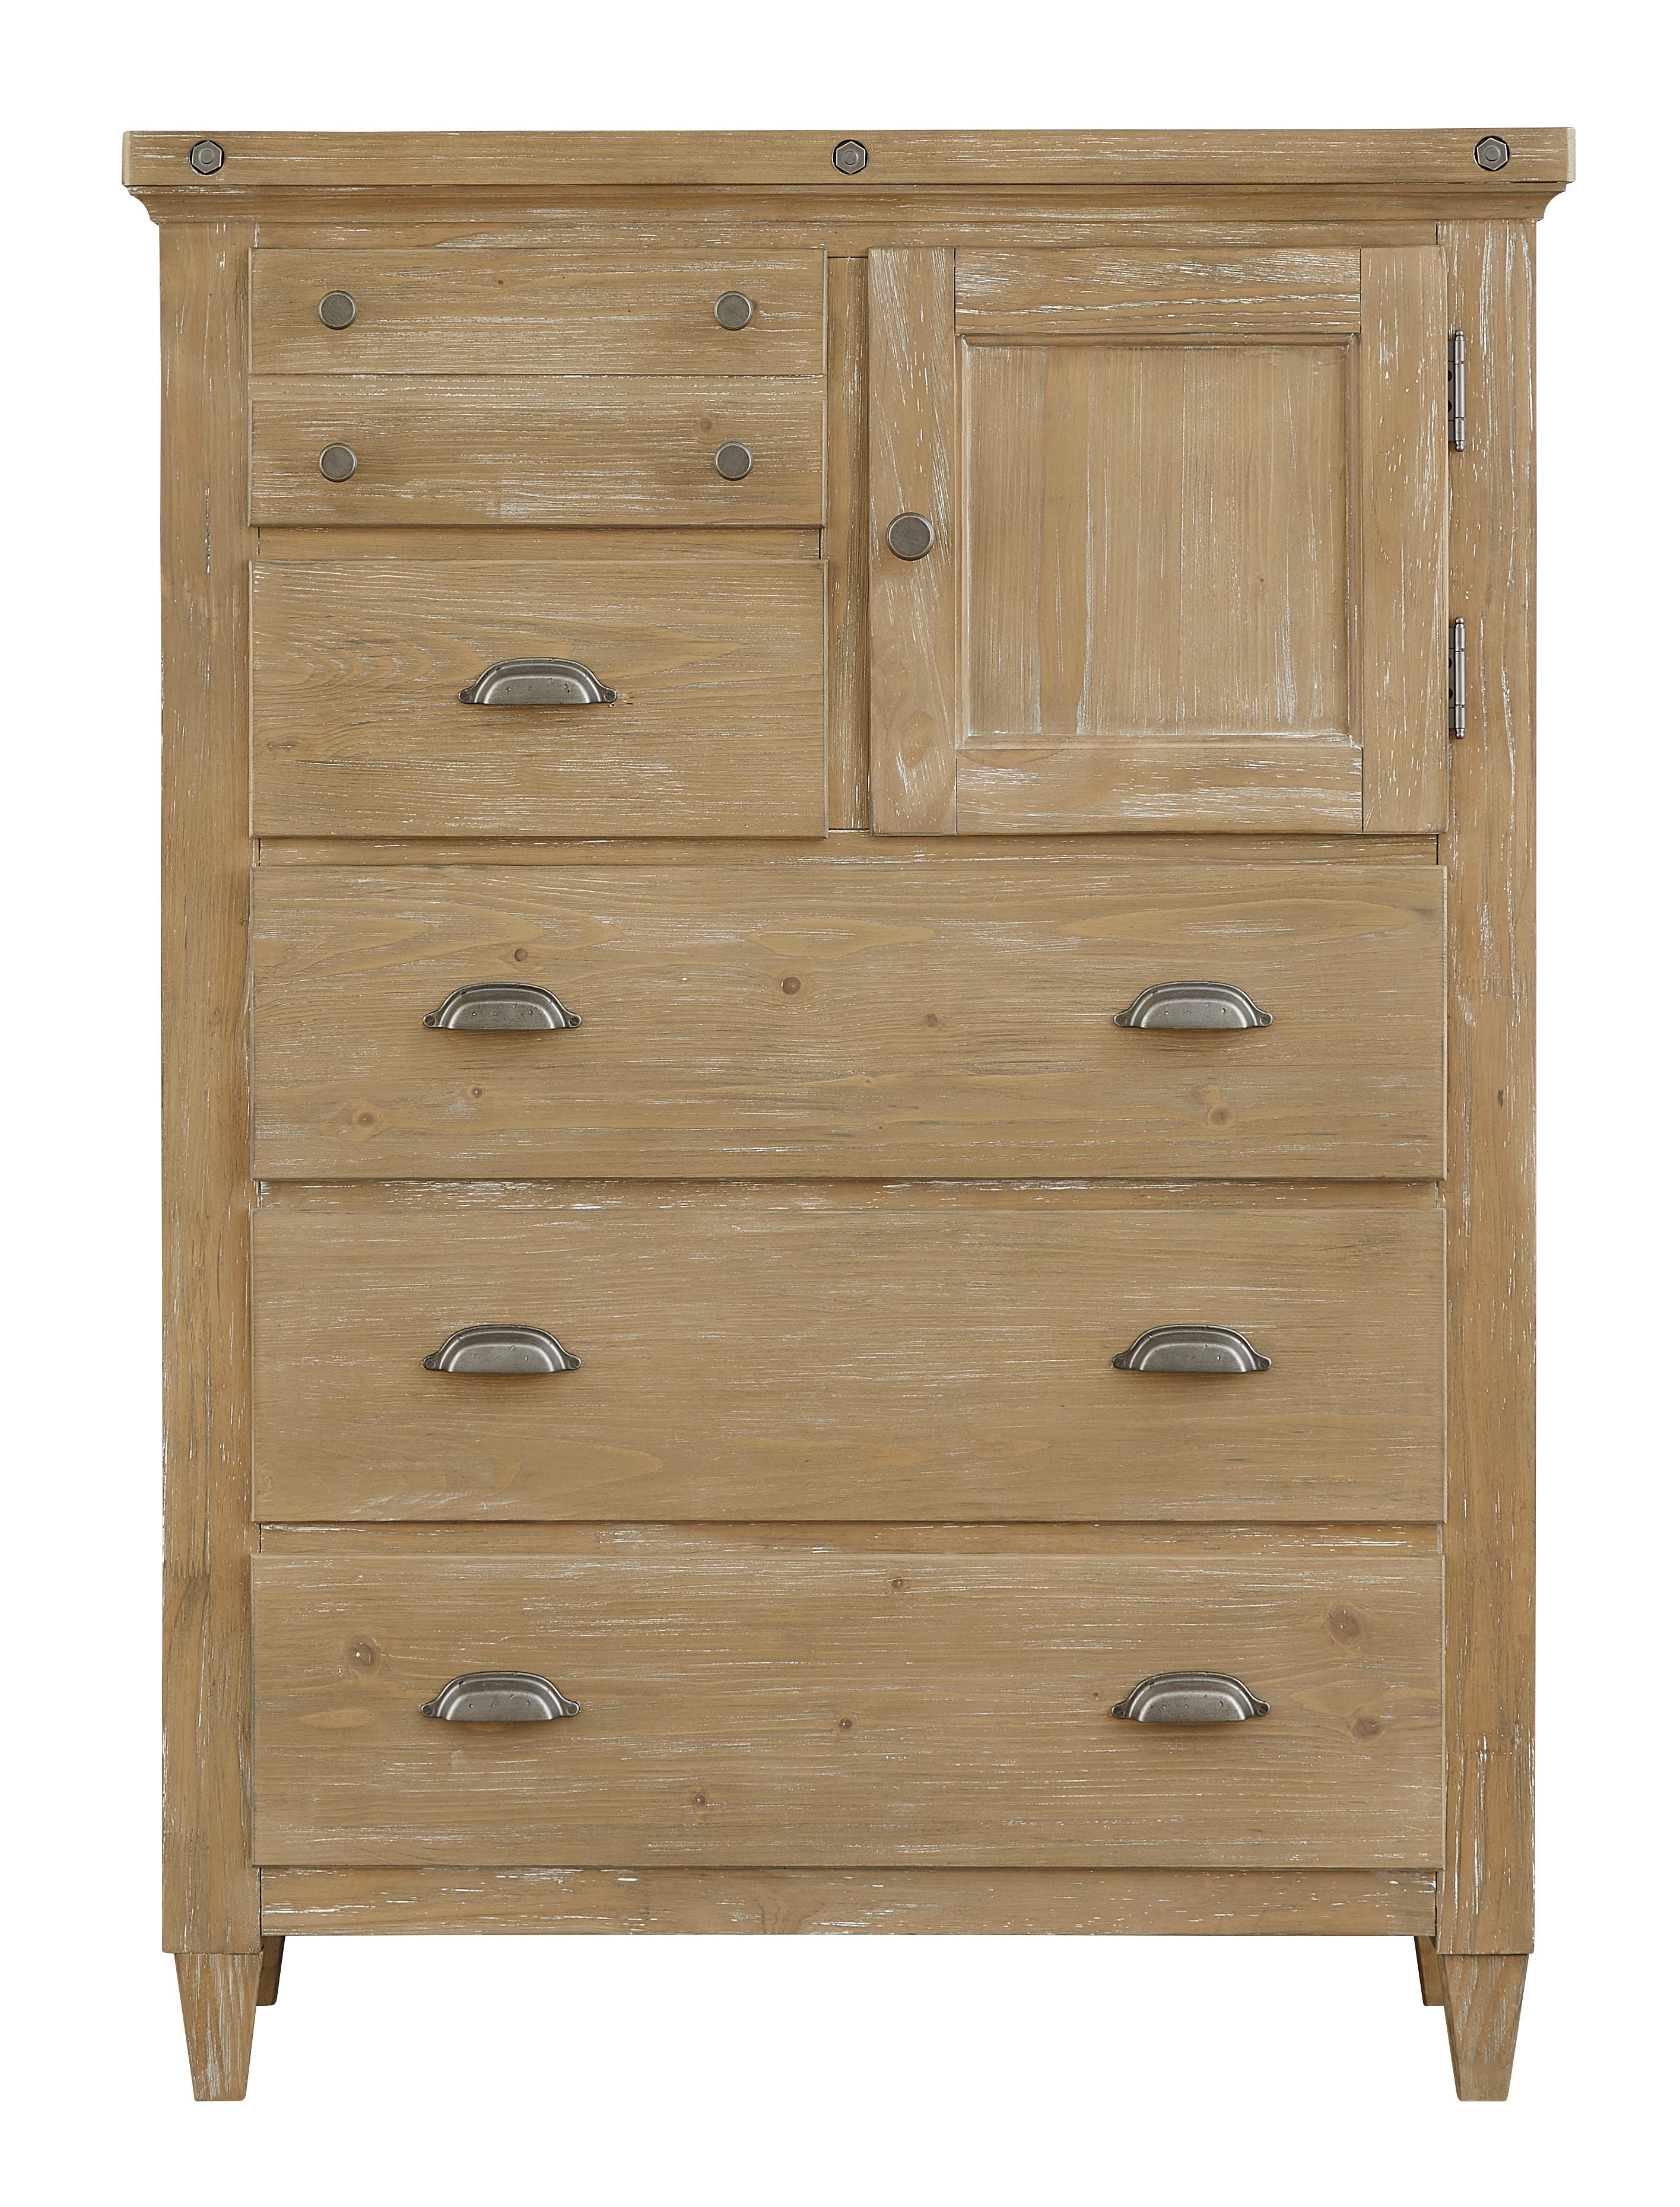 Lynnfield - Drawer Chest - Weathered Fawn